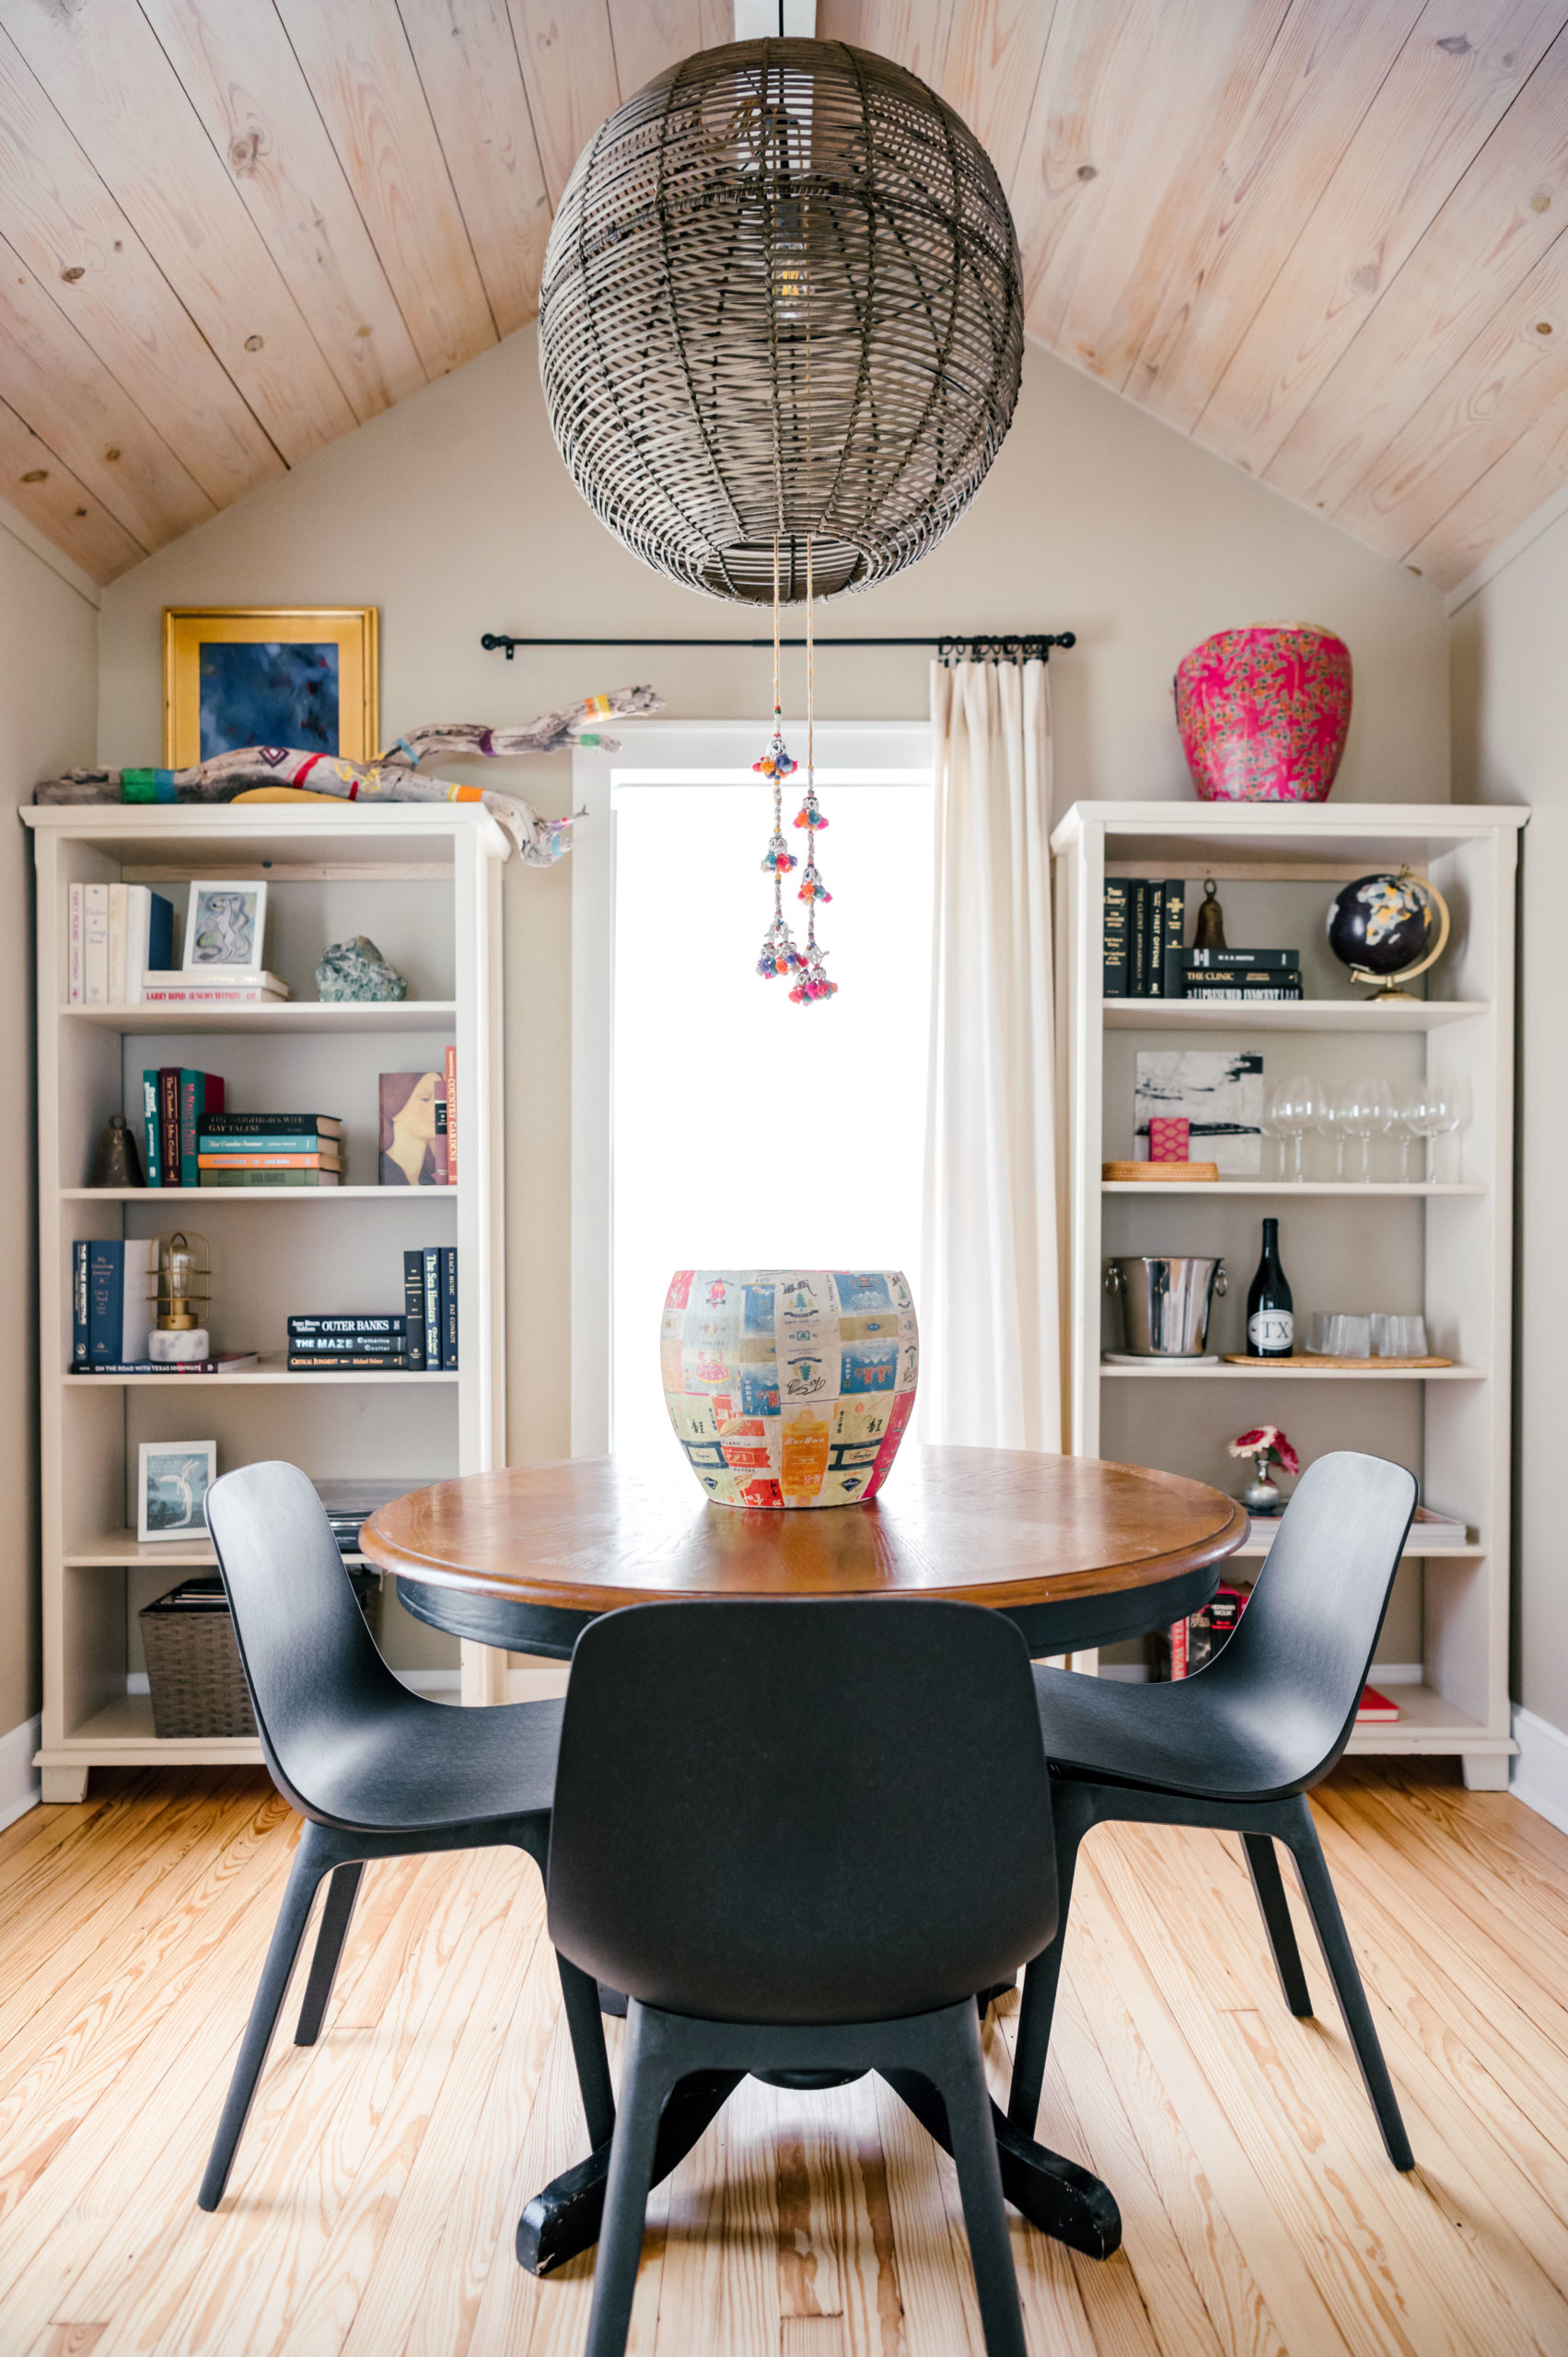 Black dining room table and chairs in dining room with shelving full of dishware and books